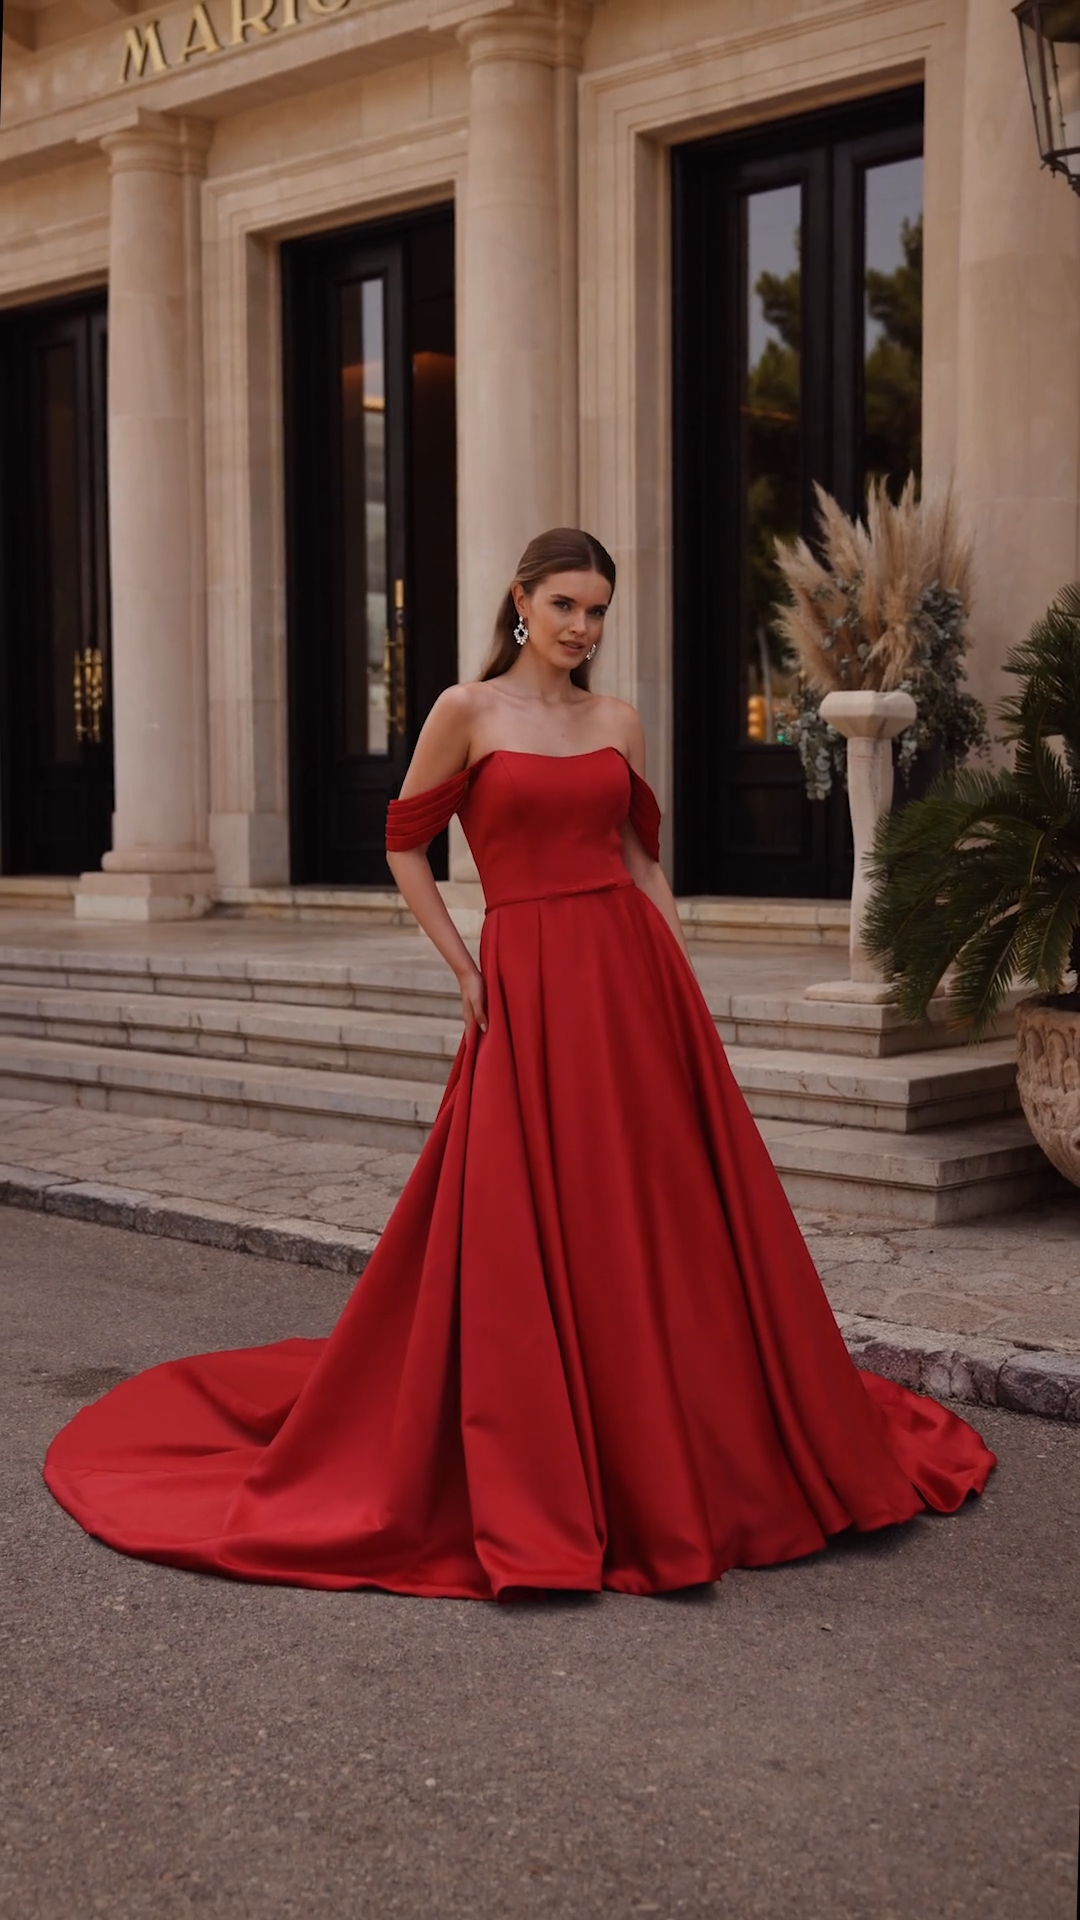 Bride wearing a red satin A-line wedding dress with off the shoulder pleated sleeves